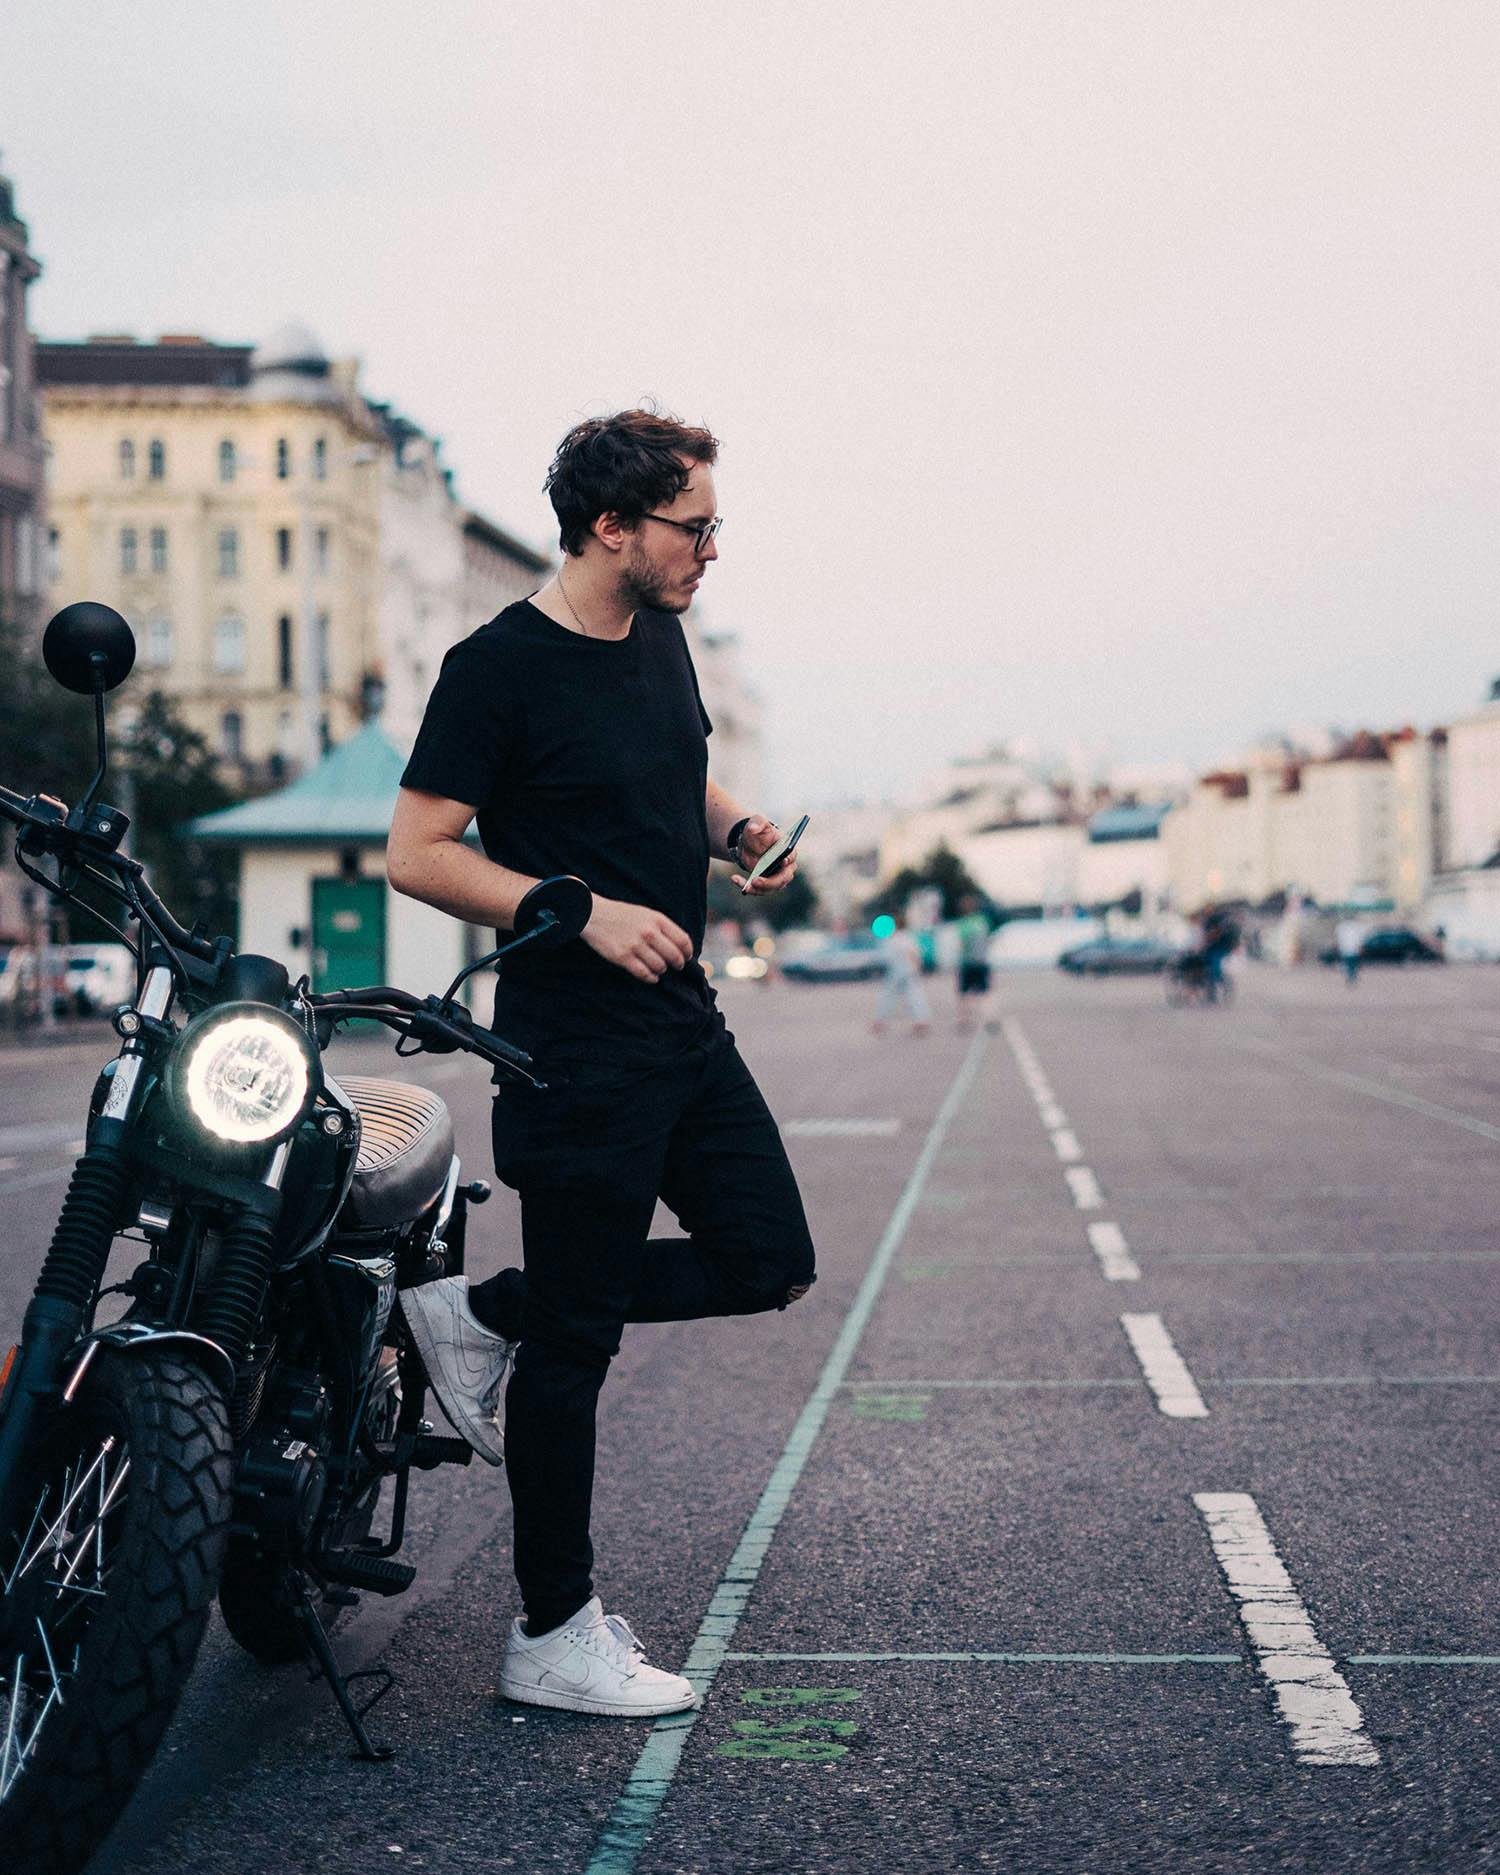 Brixton Motorcycles - Rider of the month: Hey Dominik